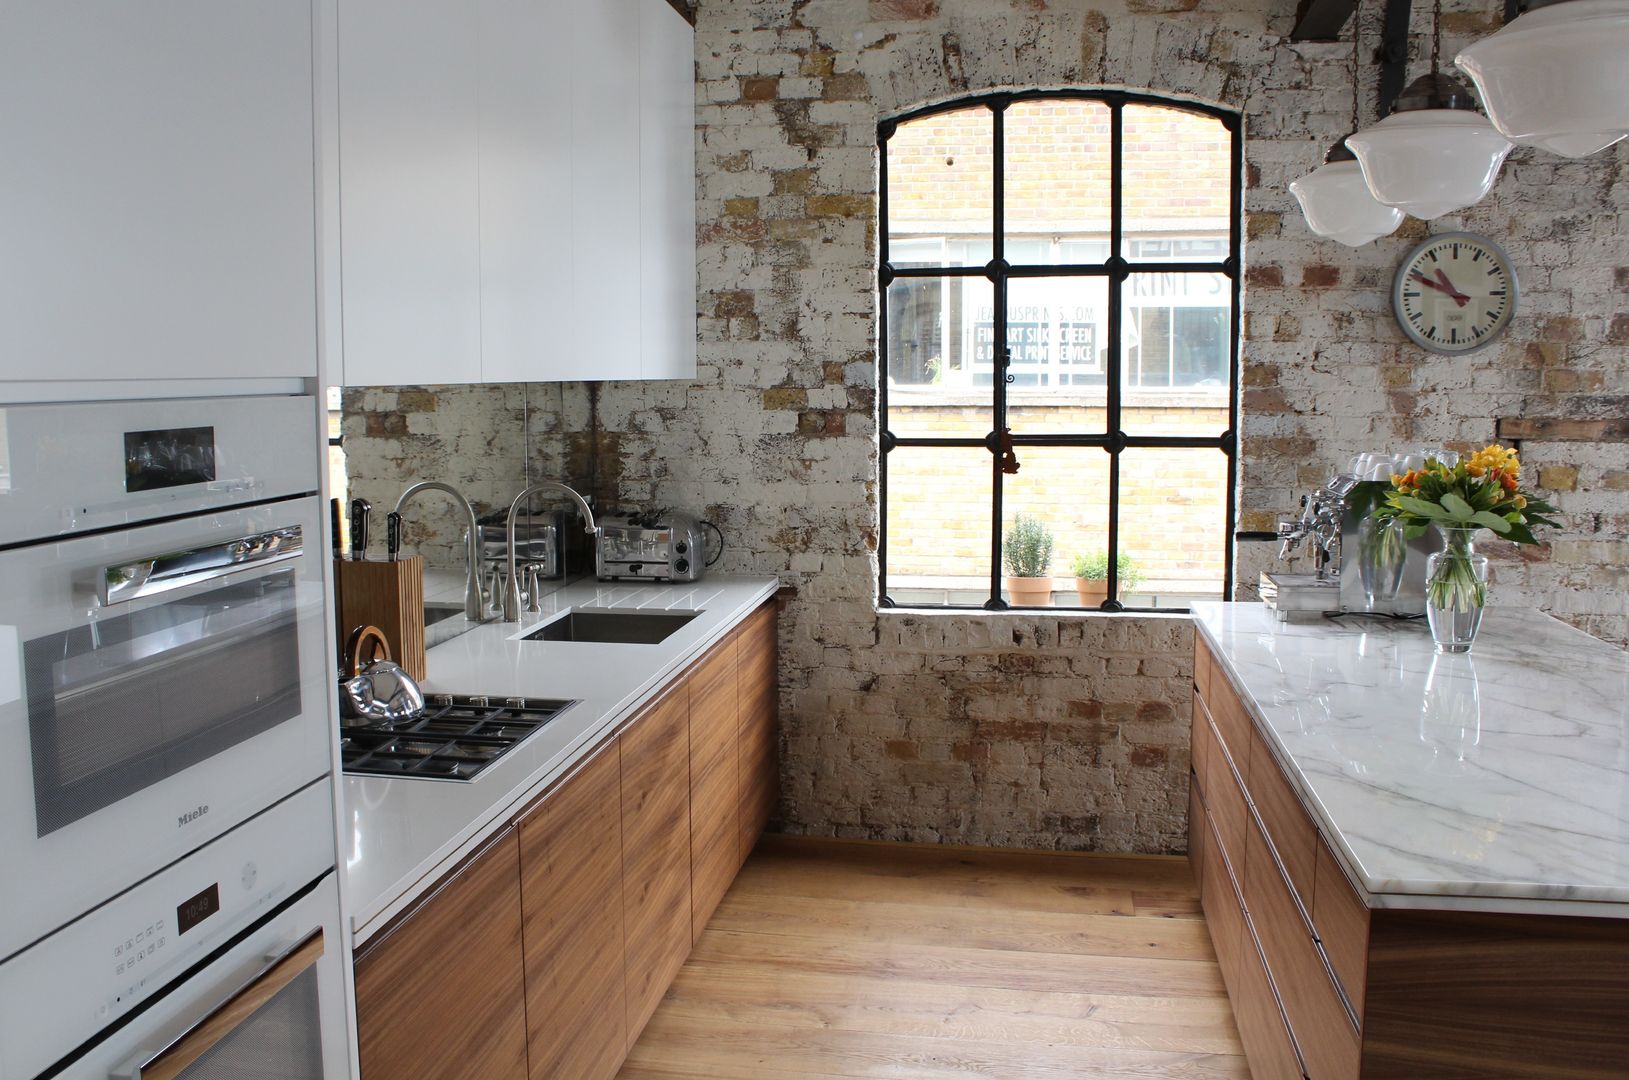 Shoreditch EC1: Warehouse Living, Increation Increation Industrial style kitchen